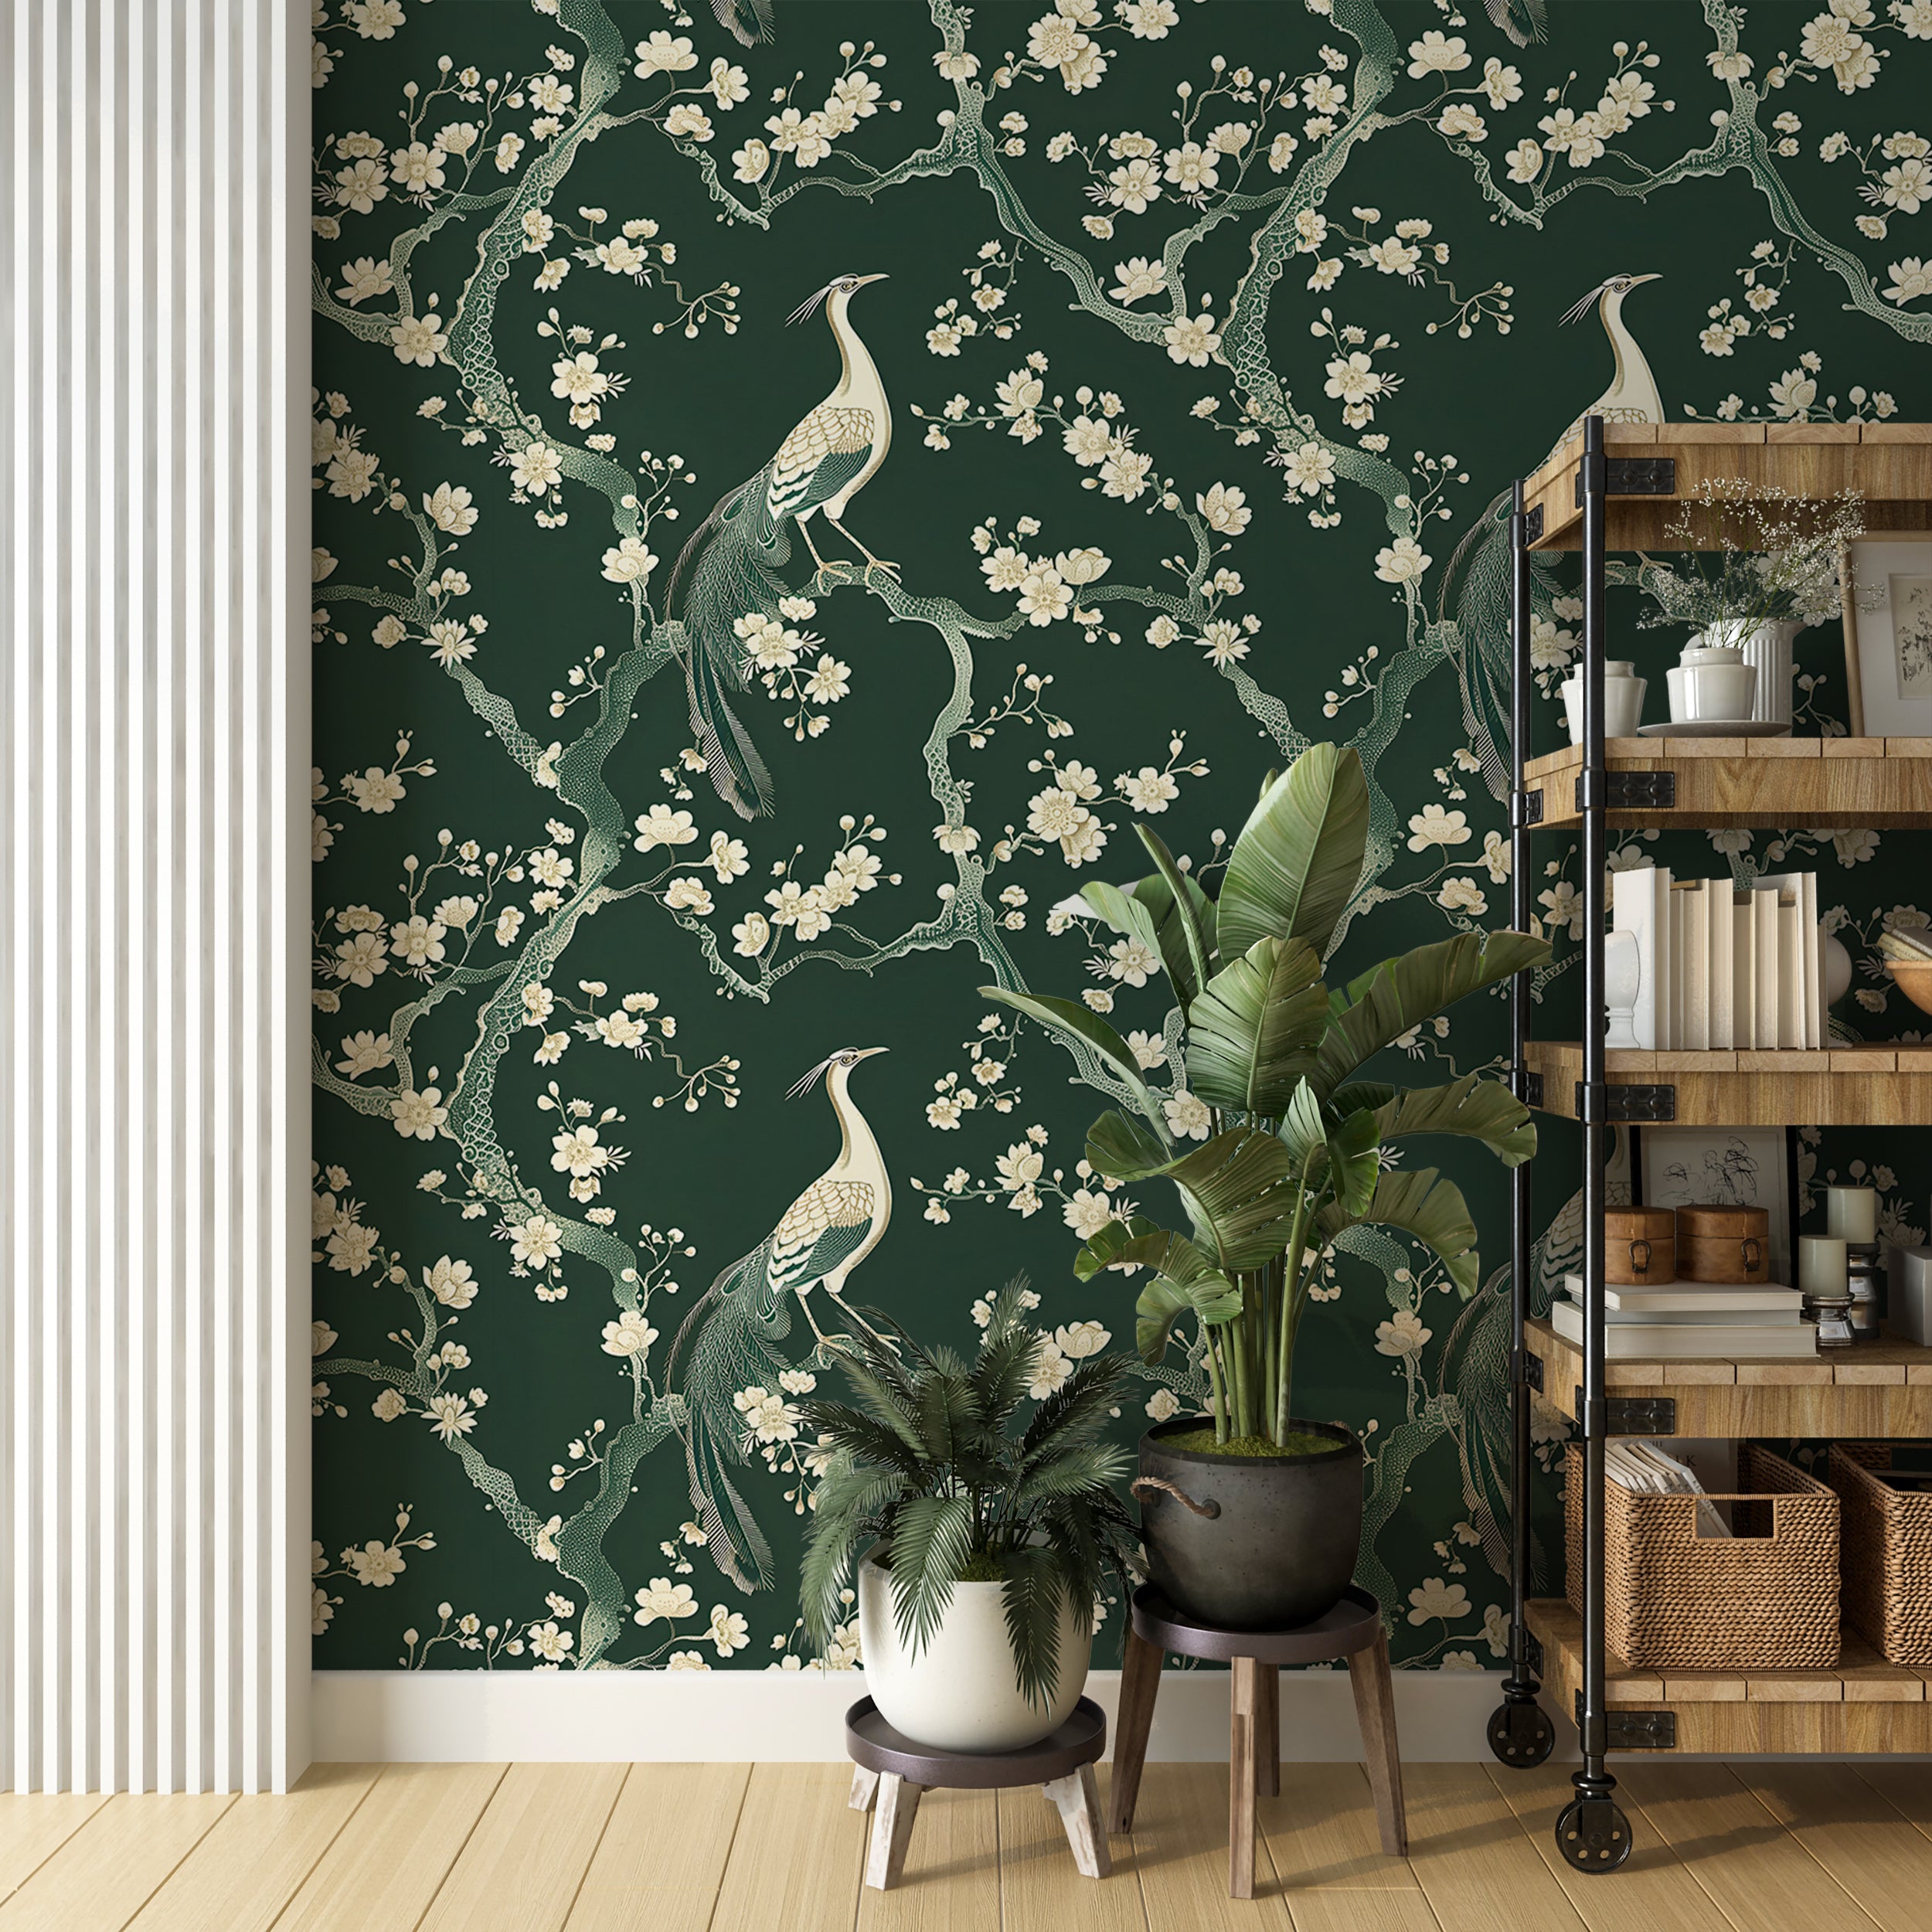 Classic chinoiserie wallpaper Green and beige floral decor